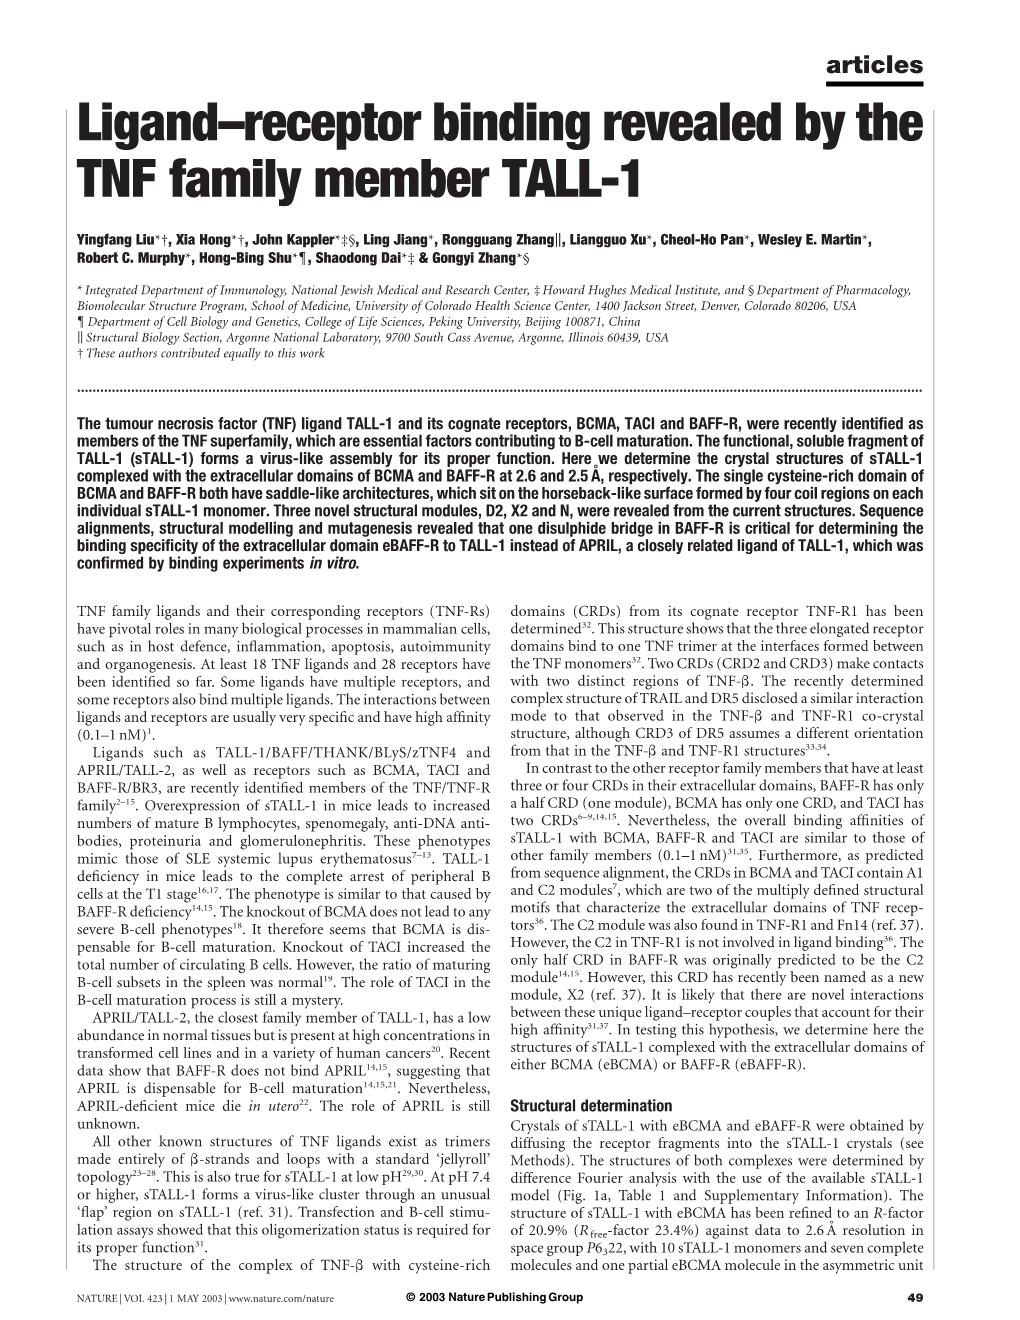 Ligand–Receptor Binding Revealed by the TNF Family Member TALL-1